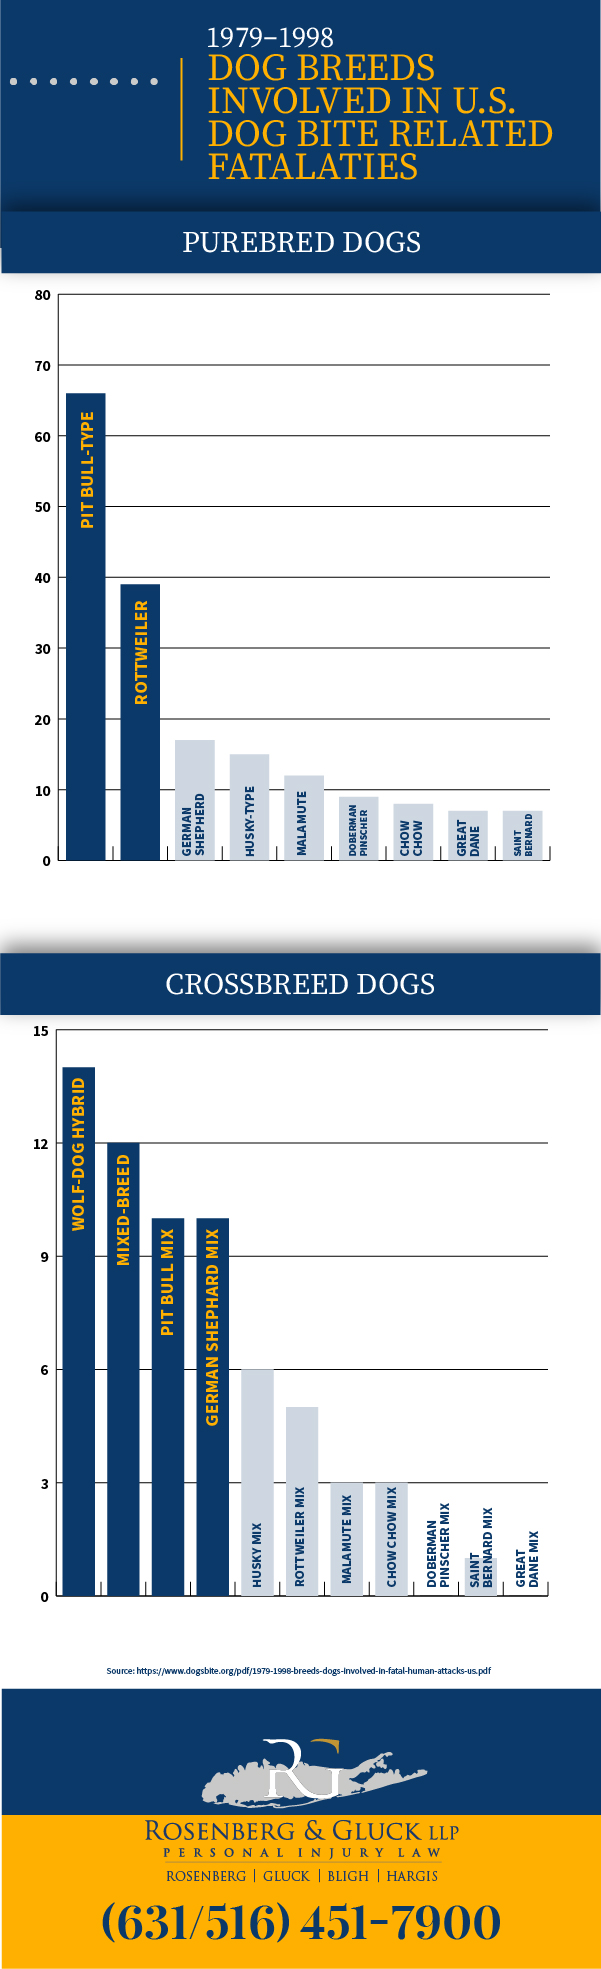 Most Dangerous Dog Breeds Infographic